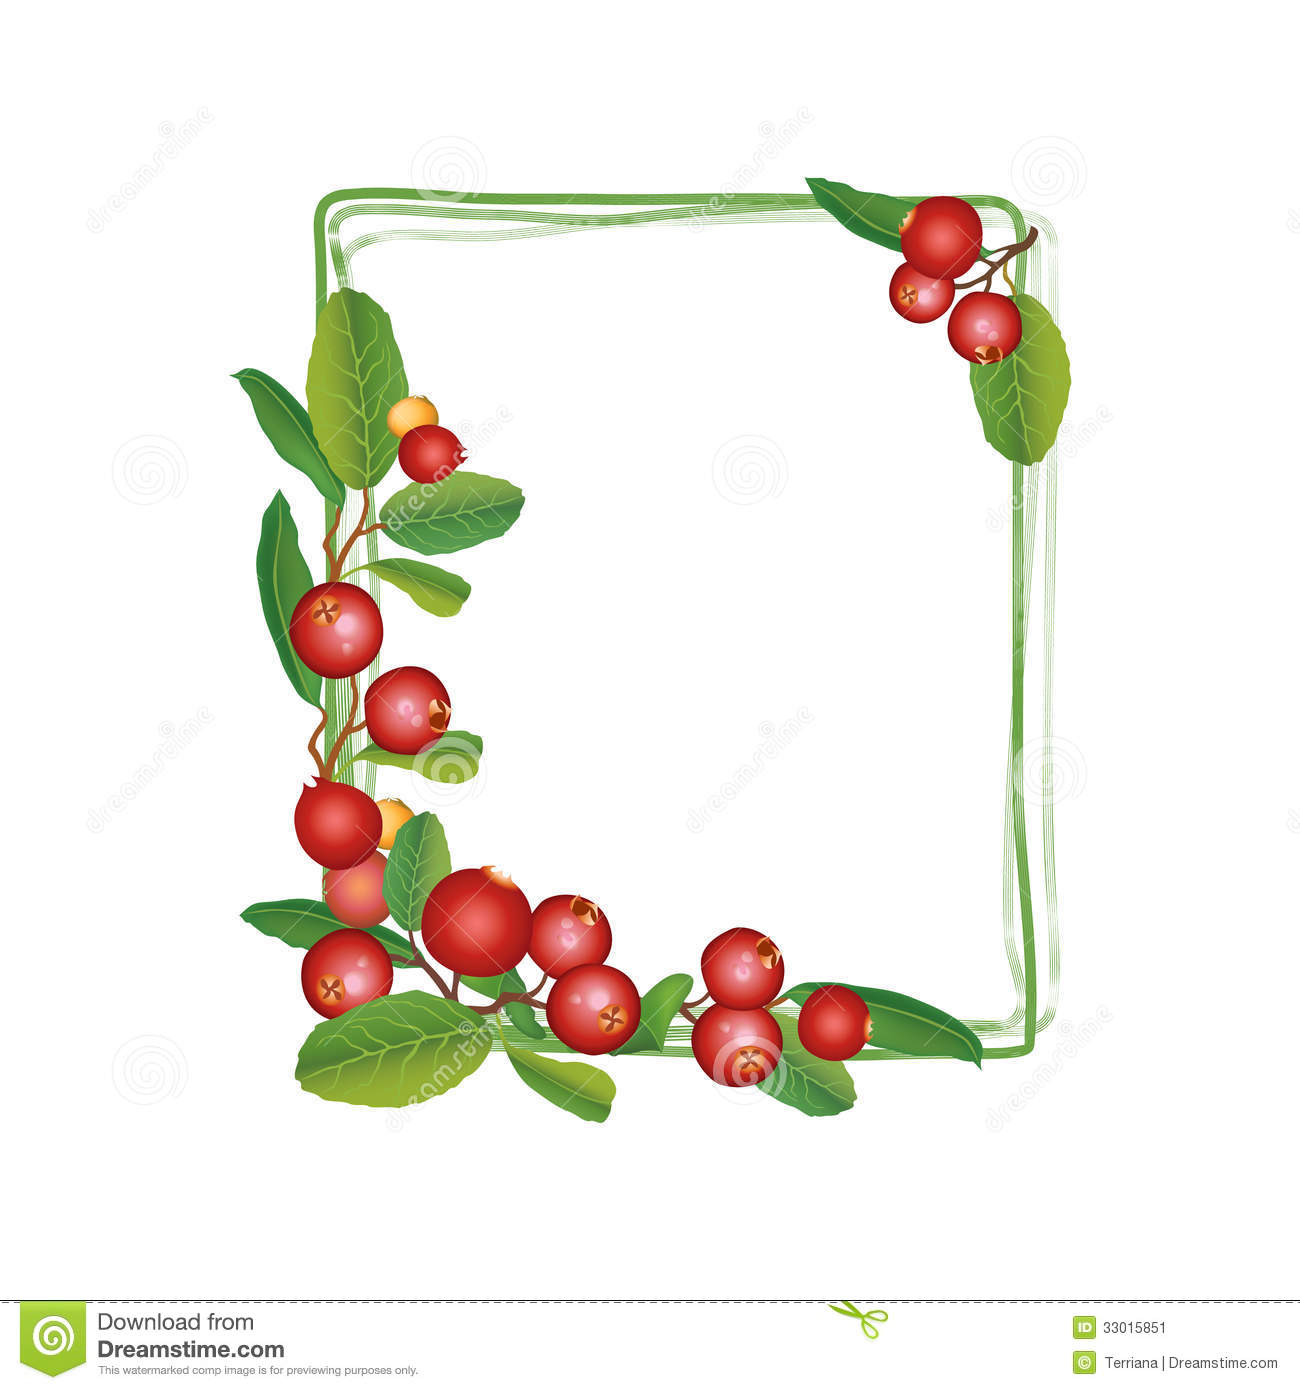 Cranberry Square Shaped Frame  Berry Garland  Ripe Red Cranberries